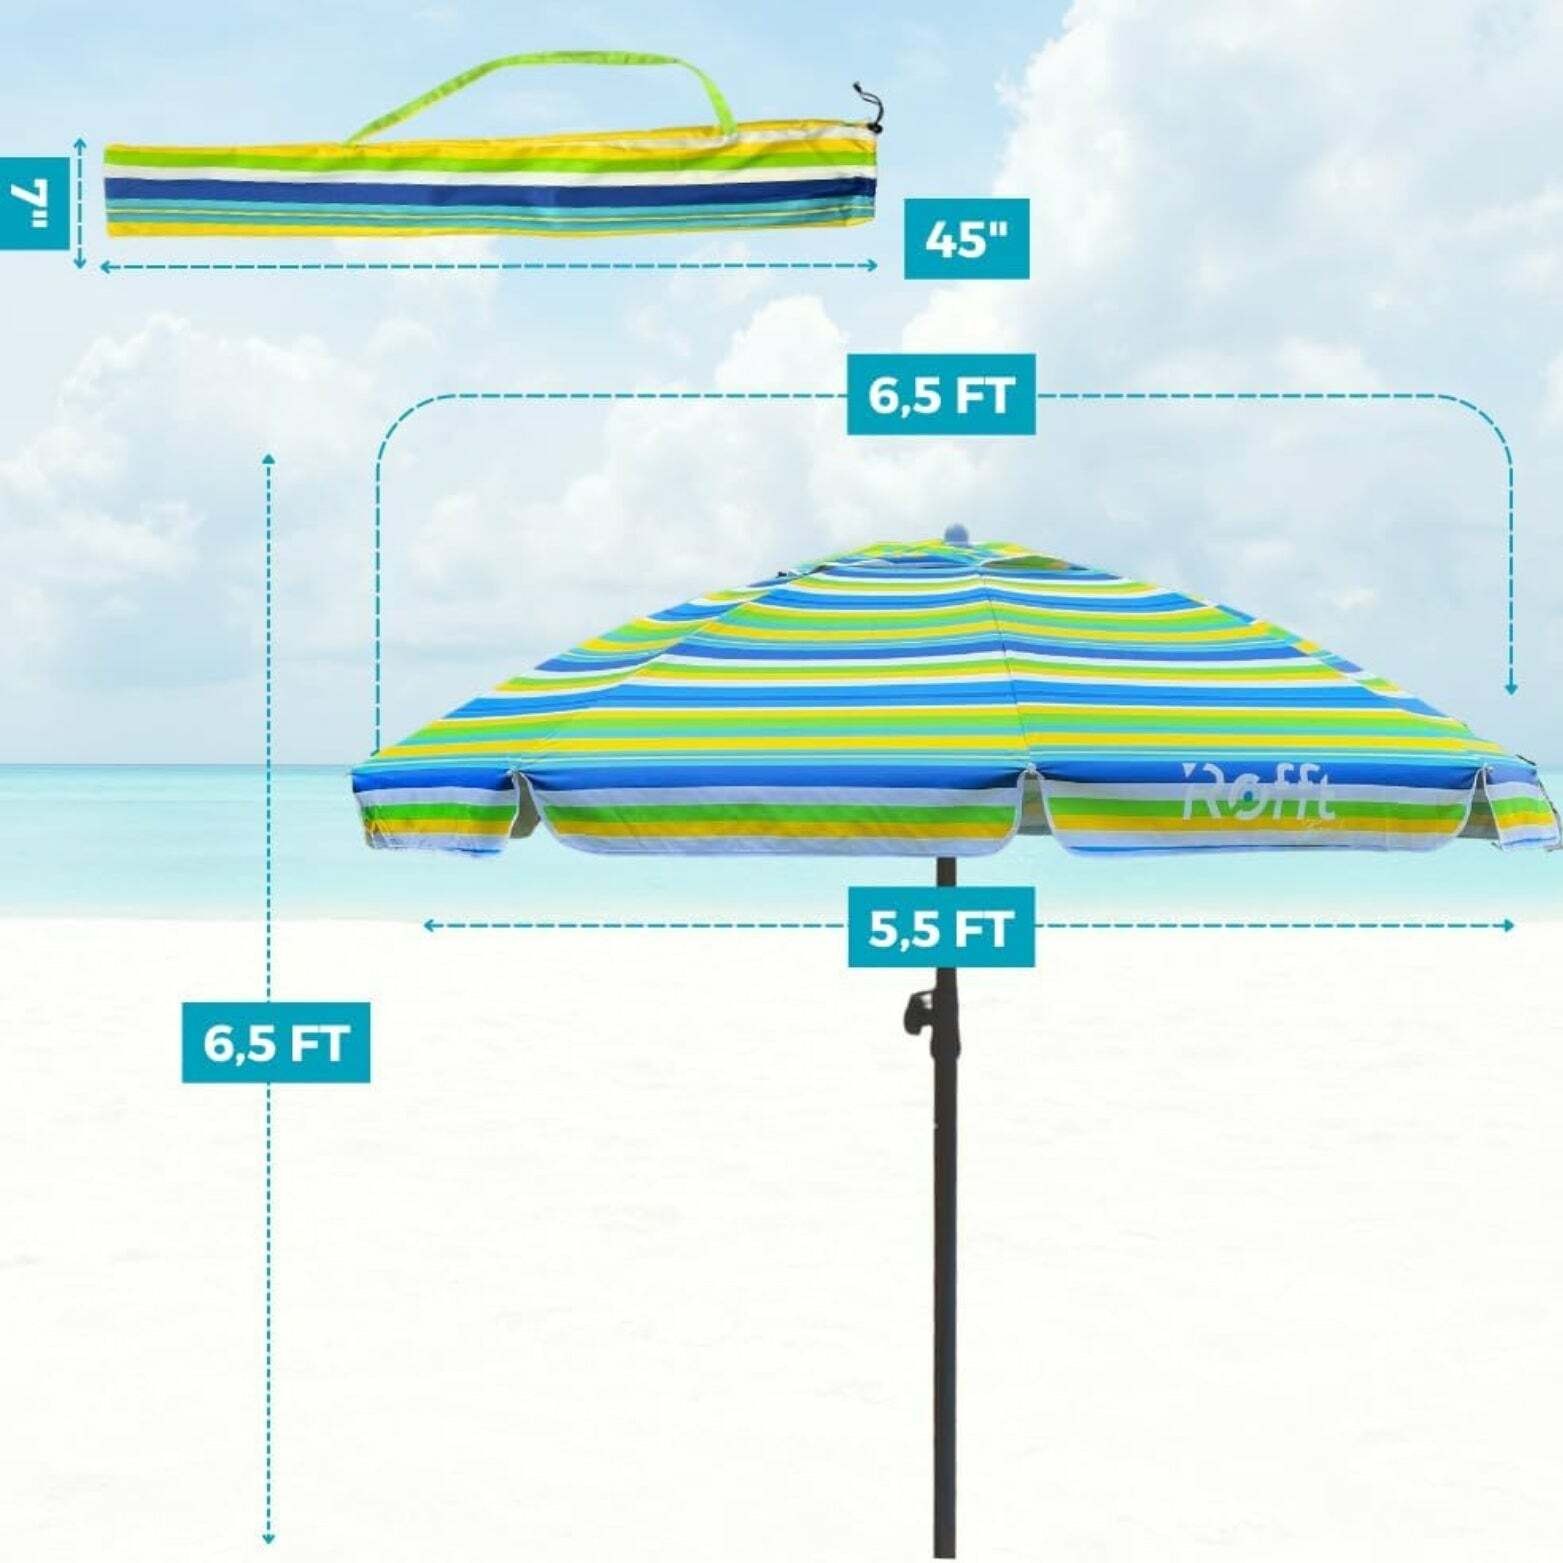 ROFFT Sturdy Beach Umbrella with UV Protection and Windproof Design - 6.5 Ft Coverage, Steel & Aluminum Pole, Tilt Adjustment- Green Stripes